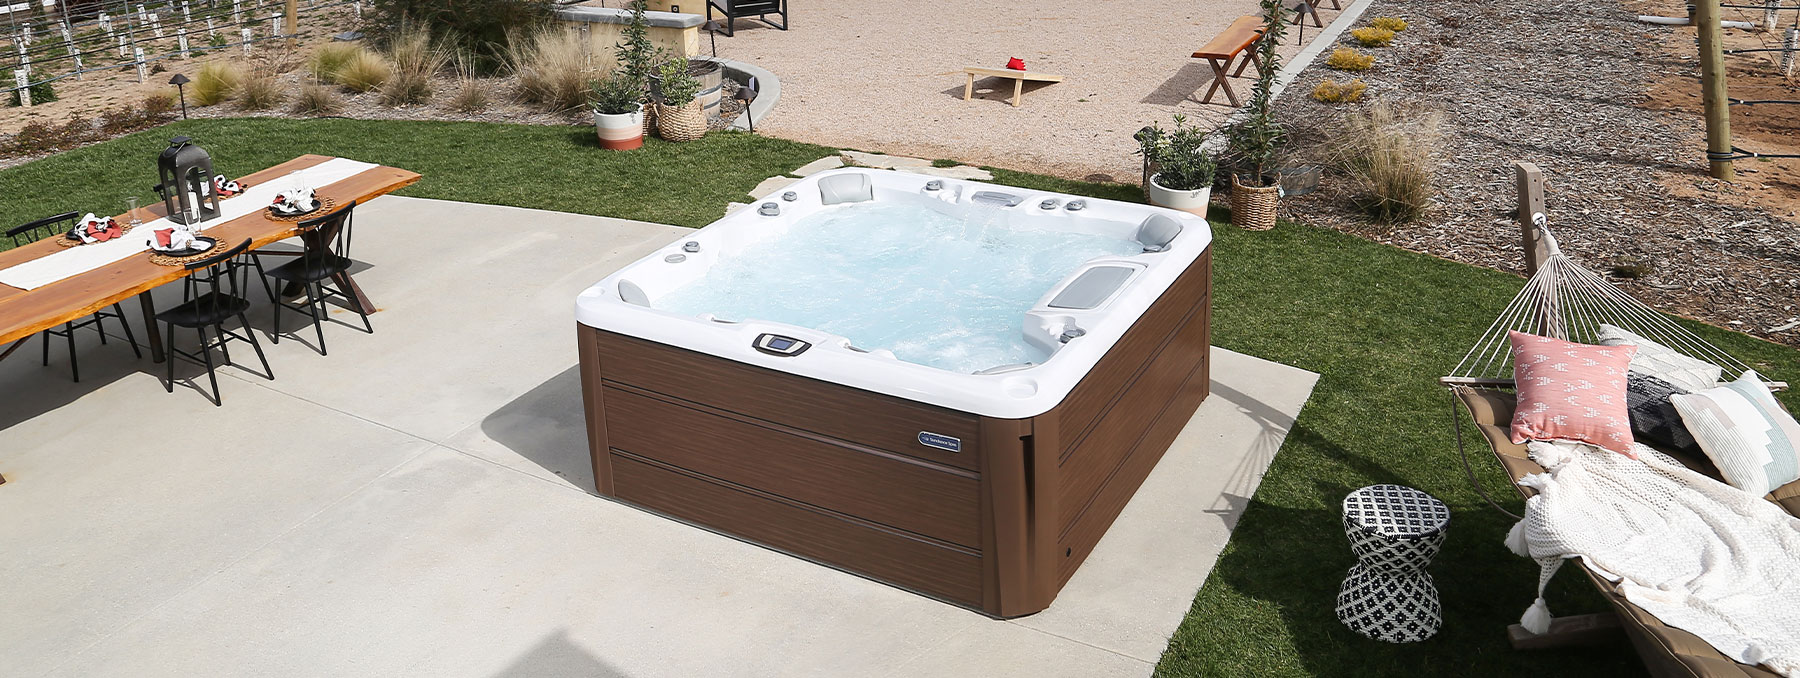 Used Hot Tubs